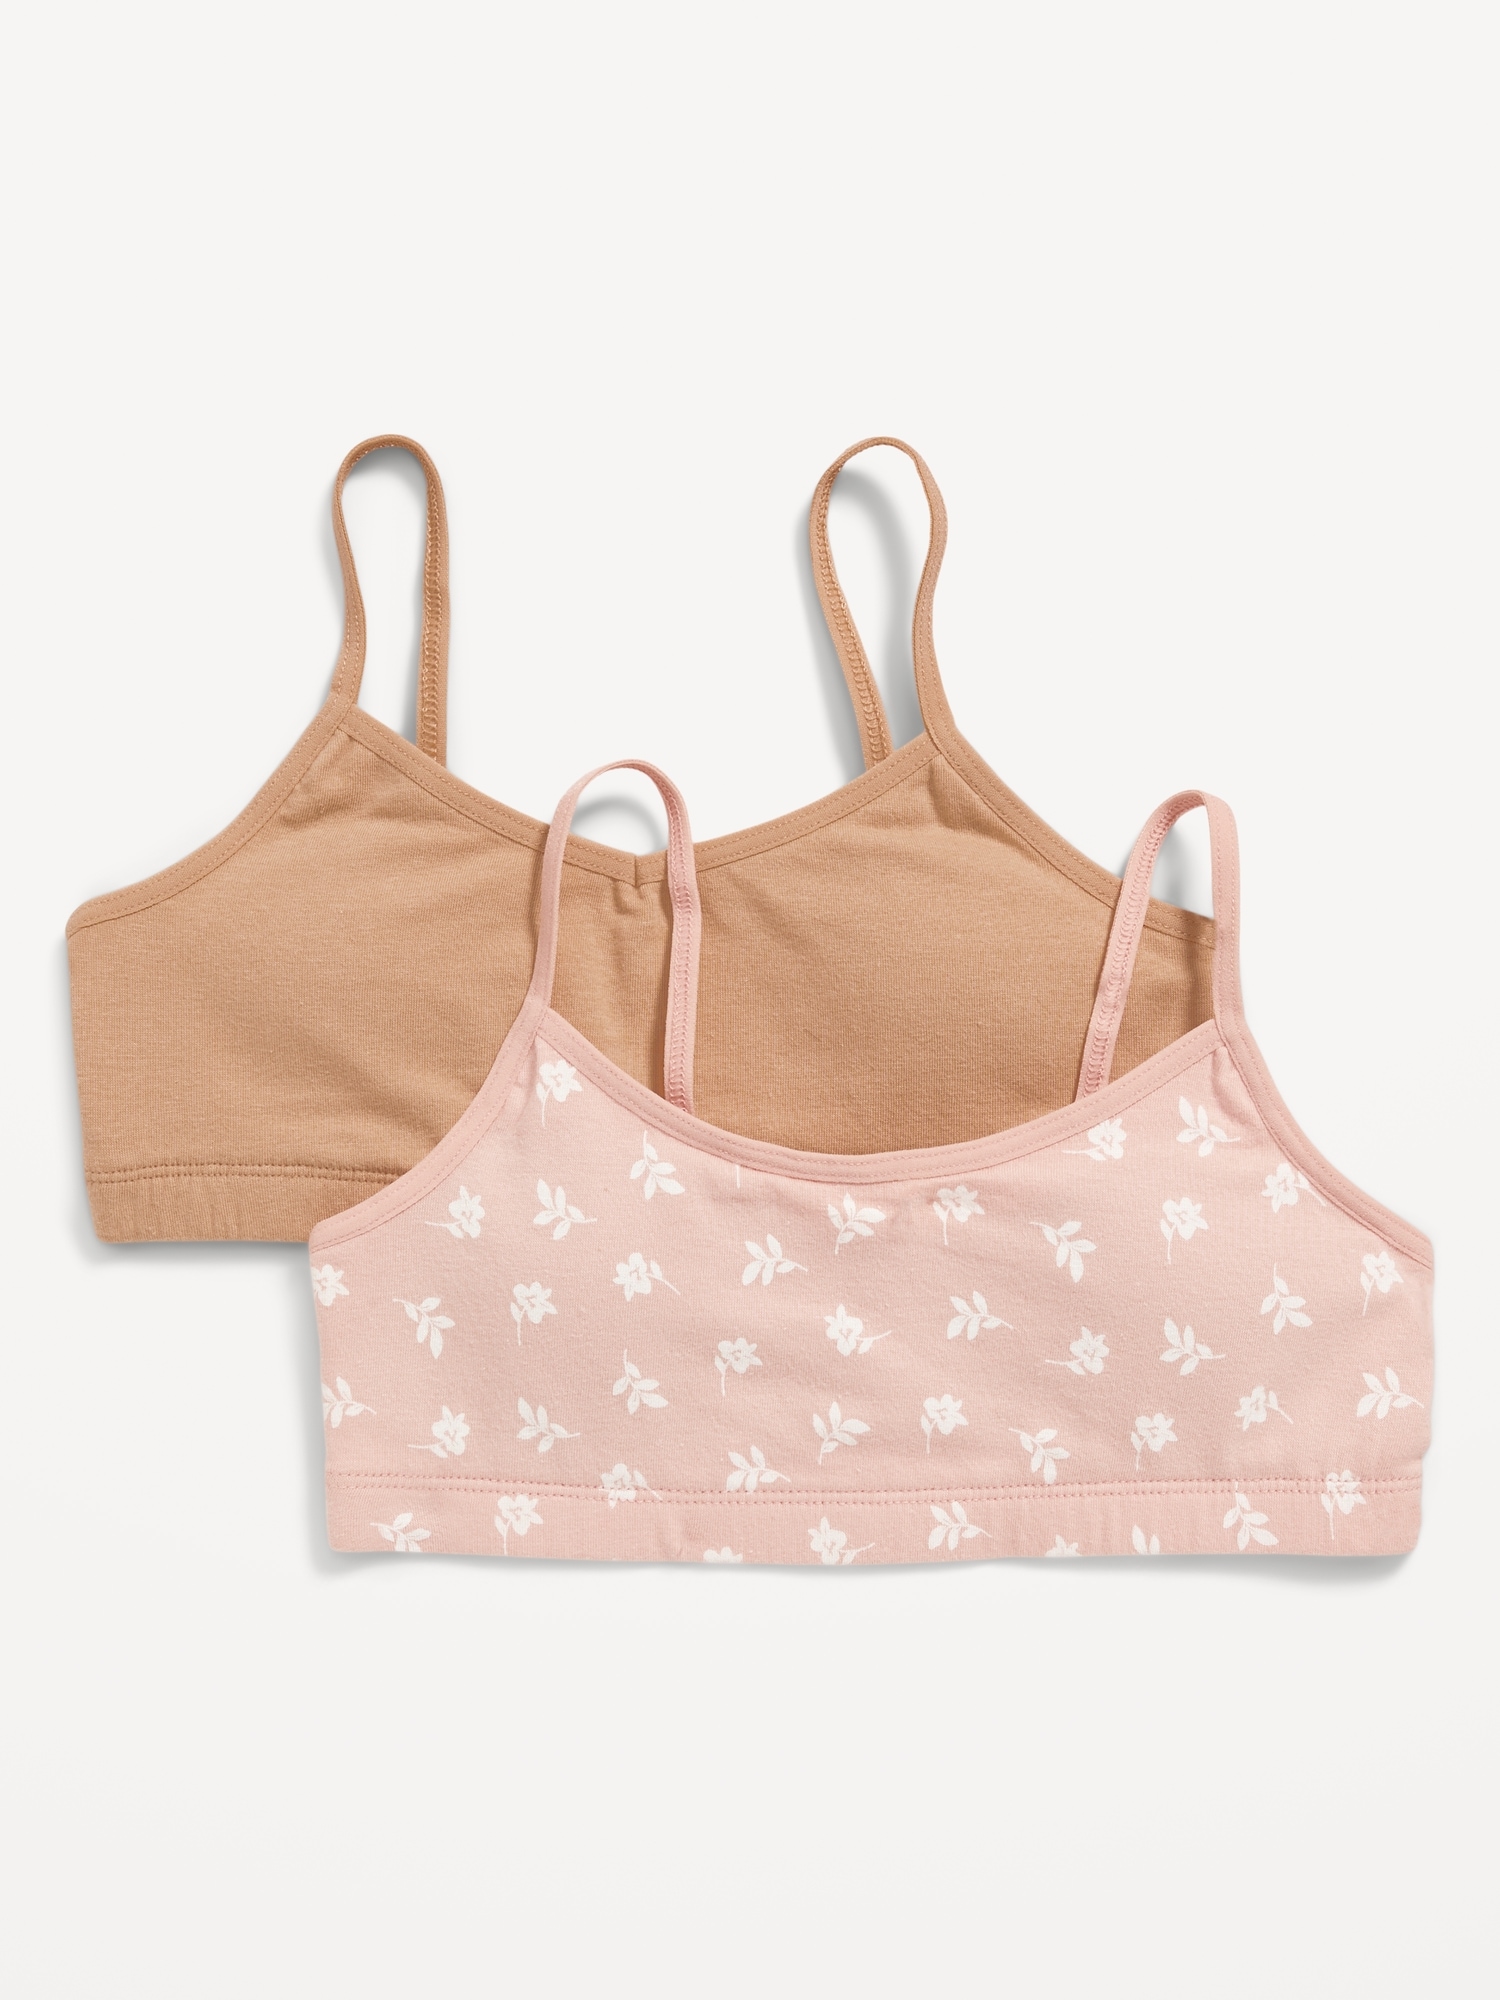 Stretch-to-Fit Patterned Cami Bra 4-Pack for Girls